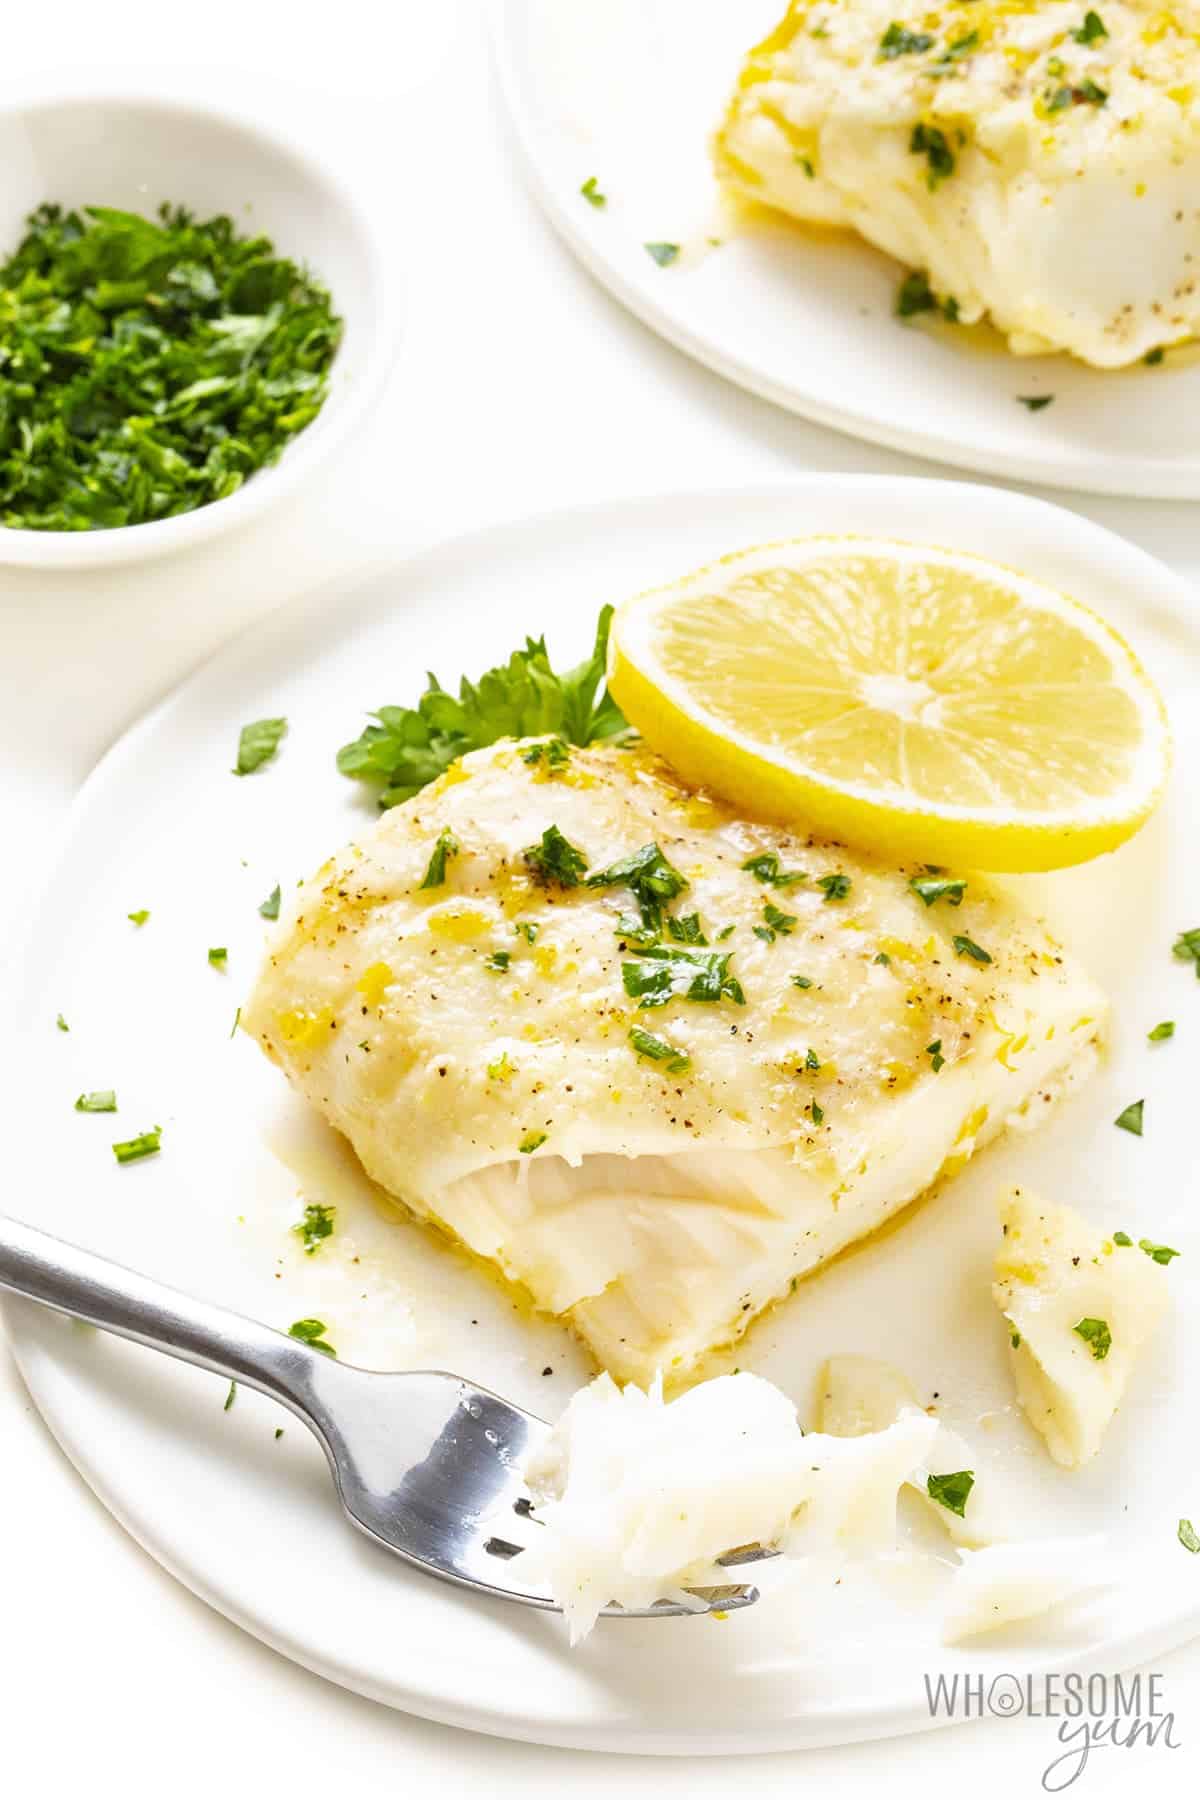 Flaked baked cod on a plate with fork